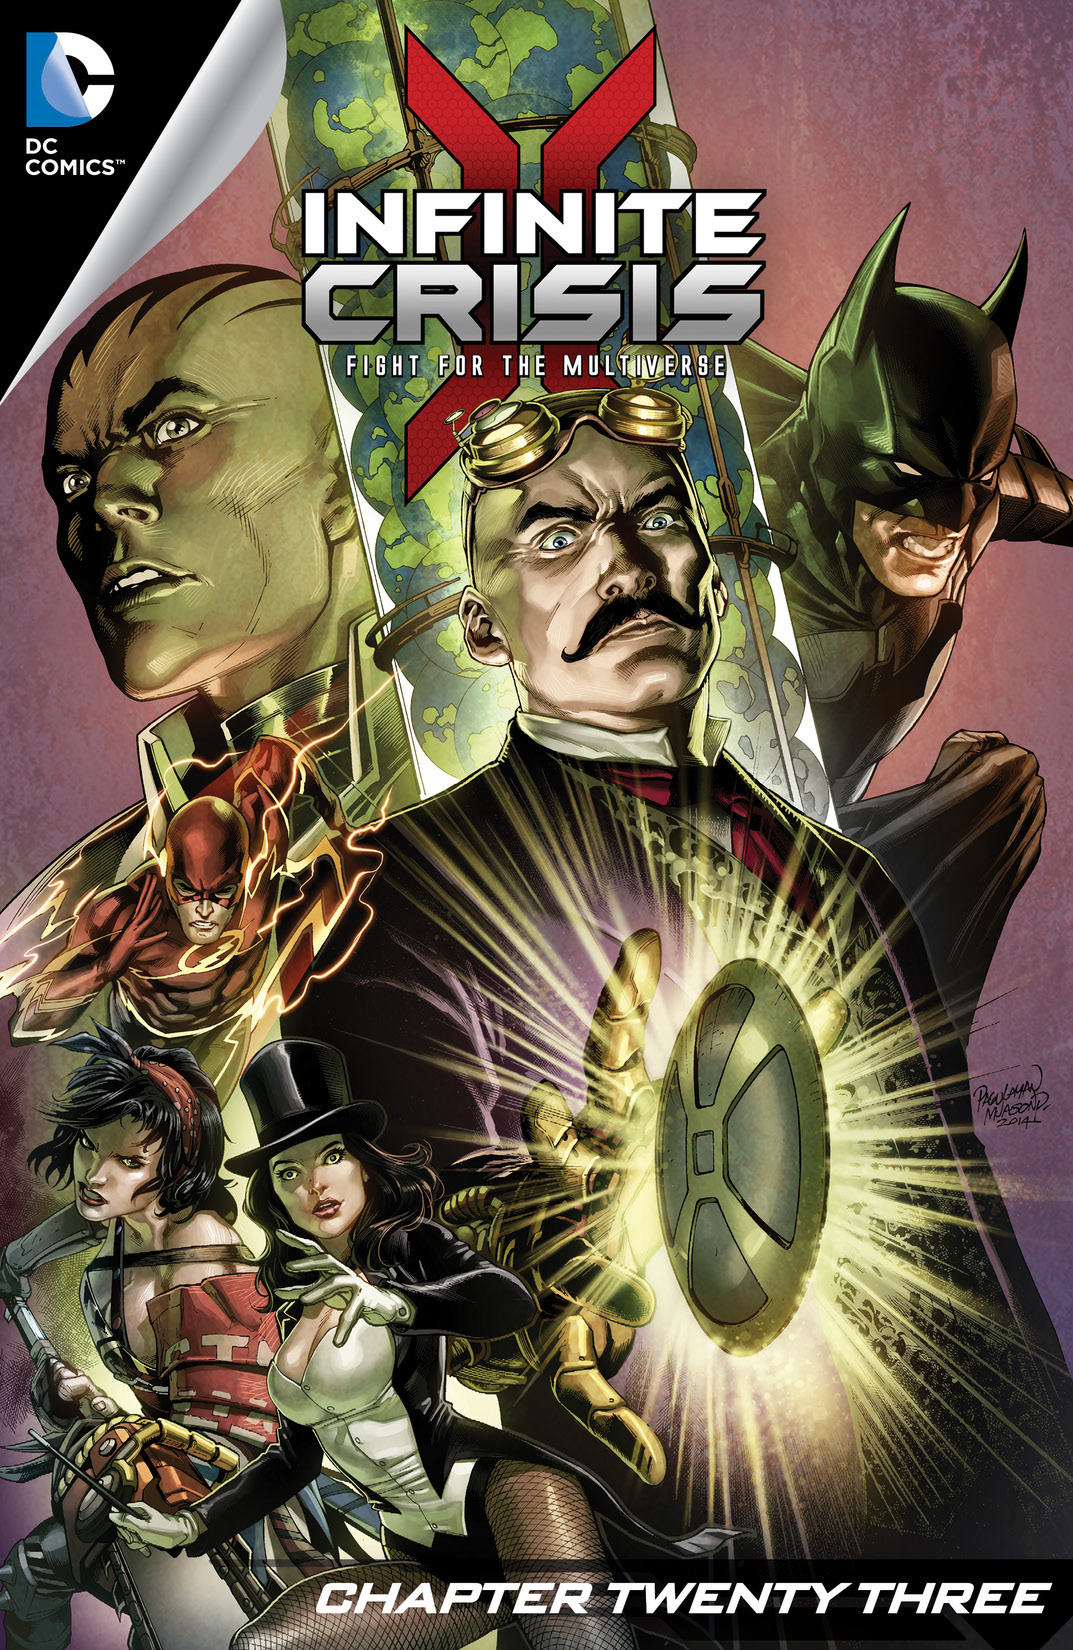 Infinite Crisis: Fight for the Multiverse #23 preview images